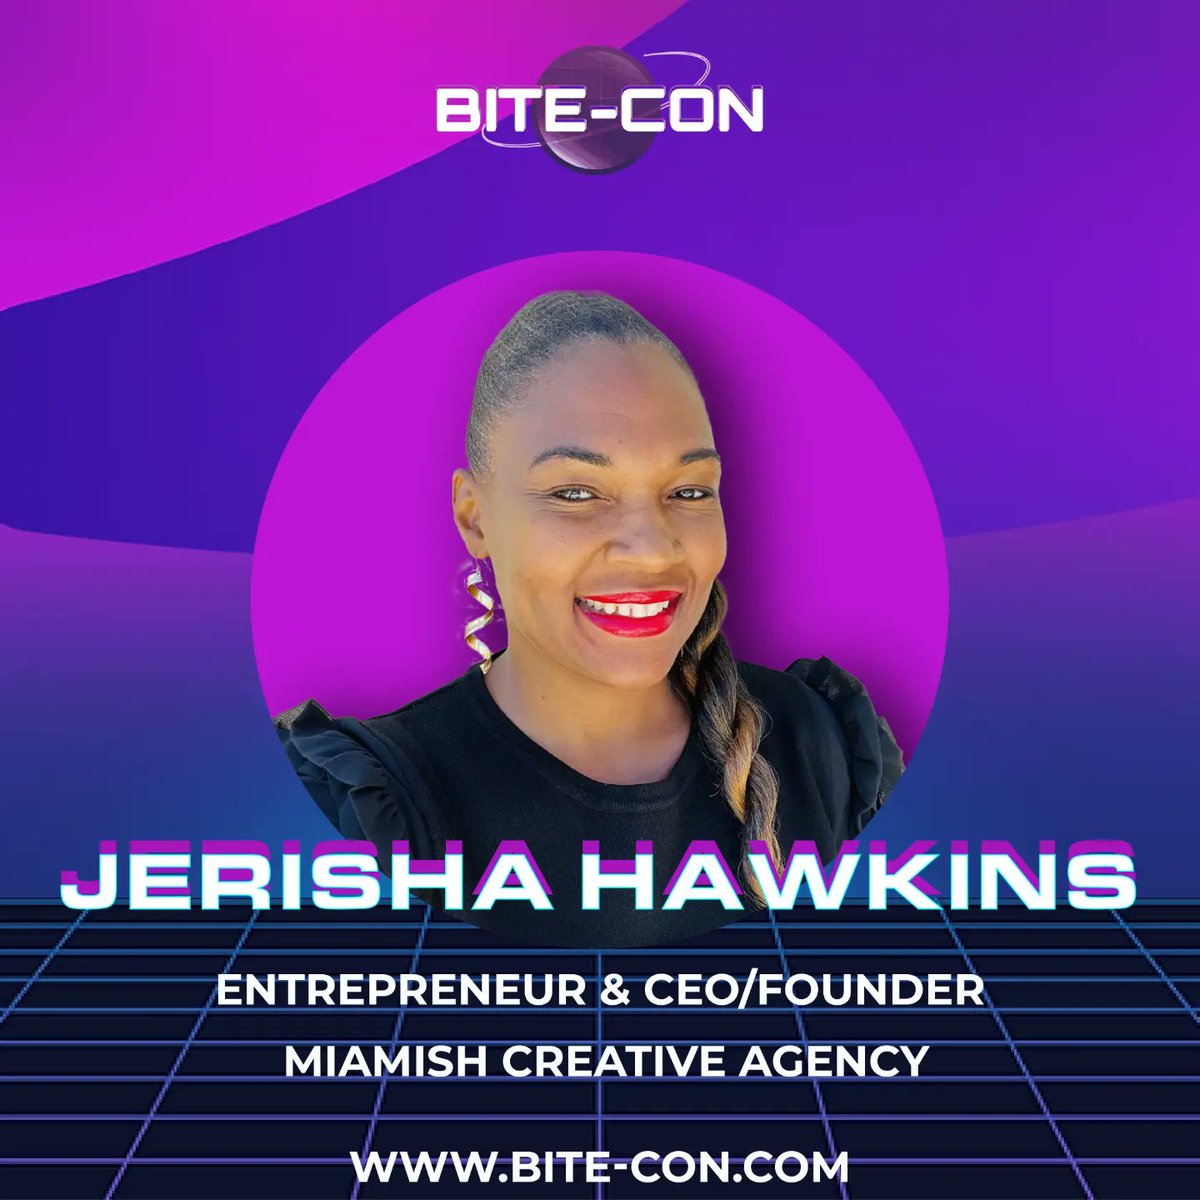 SPEAKER ALERT! We’re happy to have @darrellbooker, Raggeria Goddard & Jerisha Hawkins, join us as speakers for BITE-CON 2023! They'll be in different sessions leading the conversations on innovating in Web3! Come learn! Get Your FREE Tickets NOW at bite-con.com!